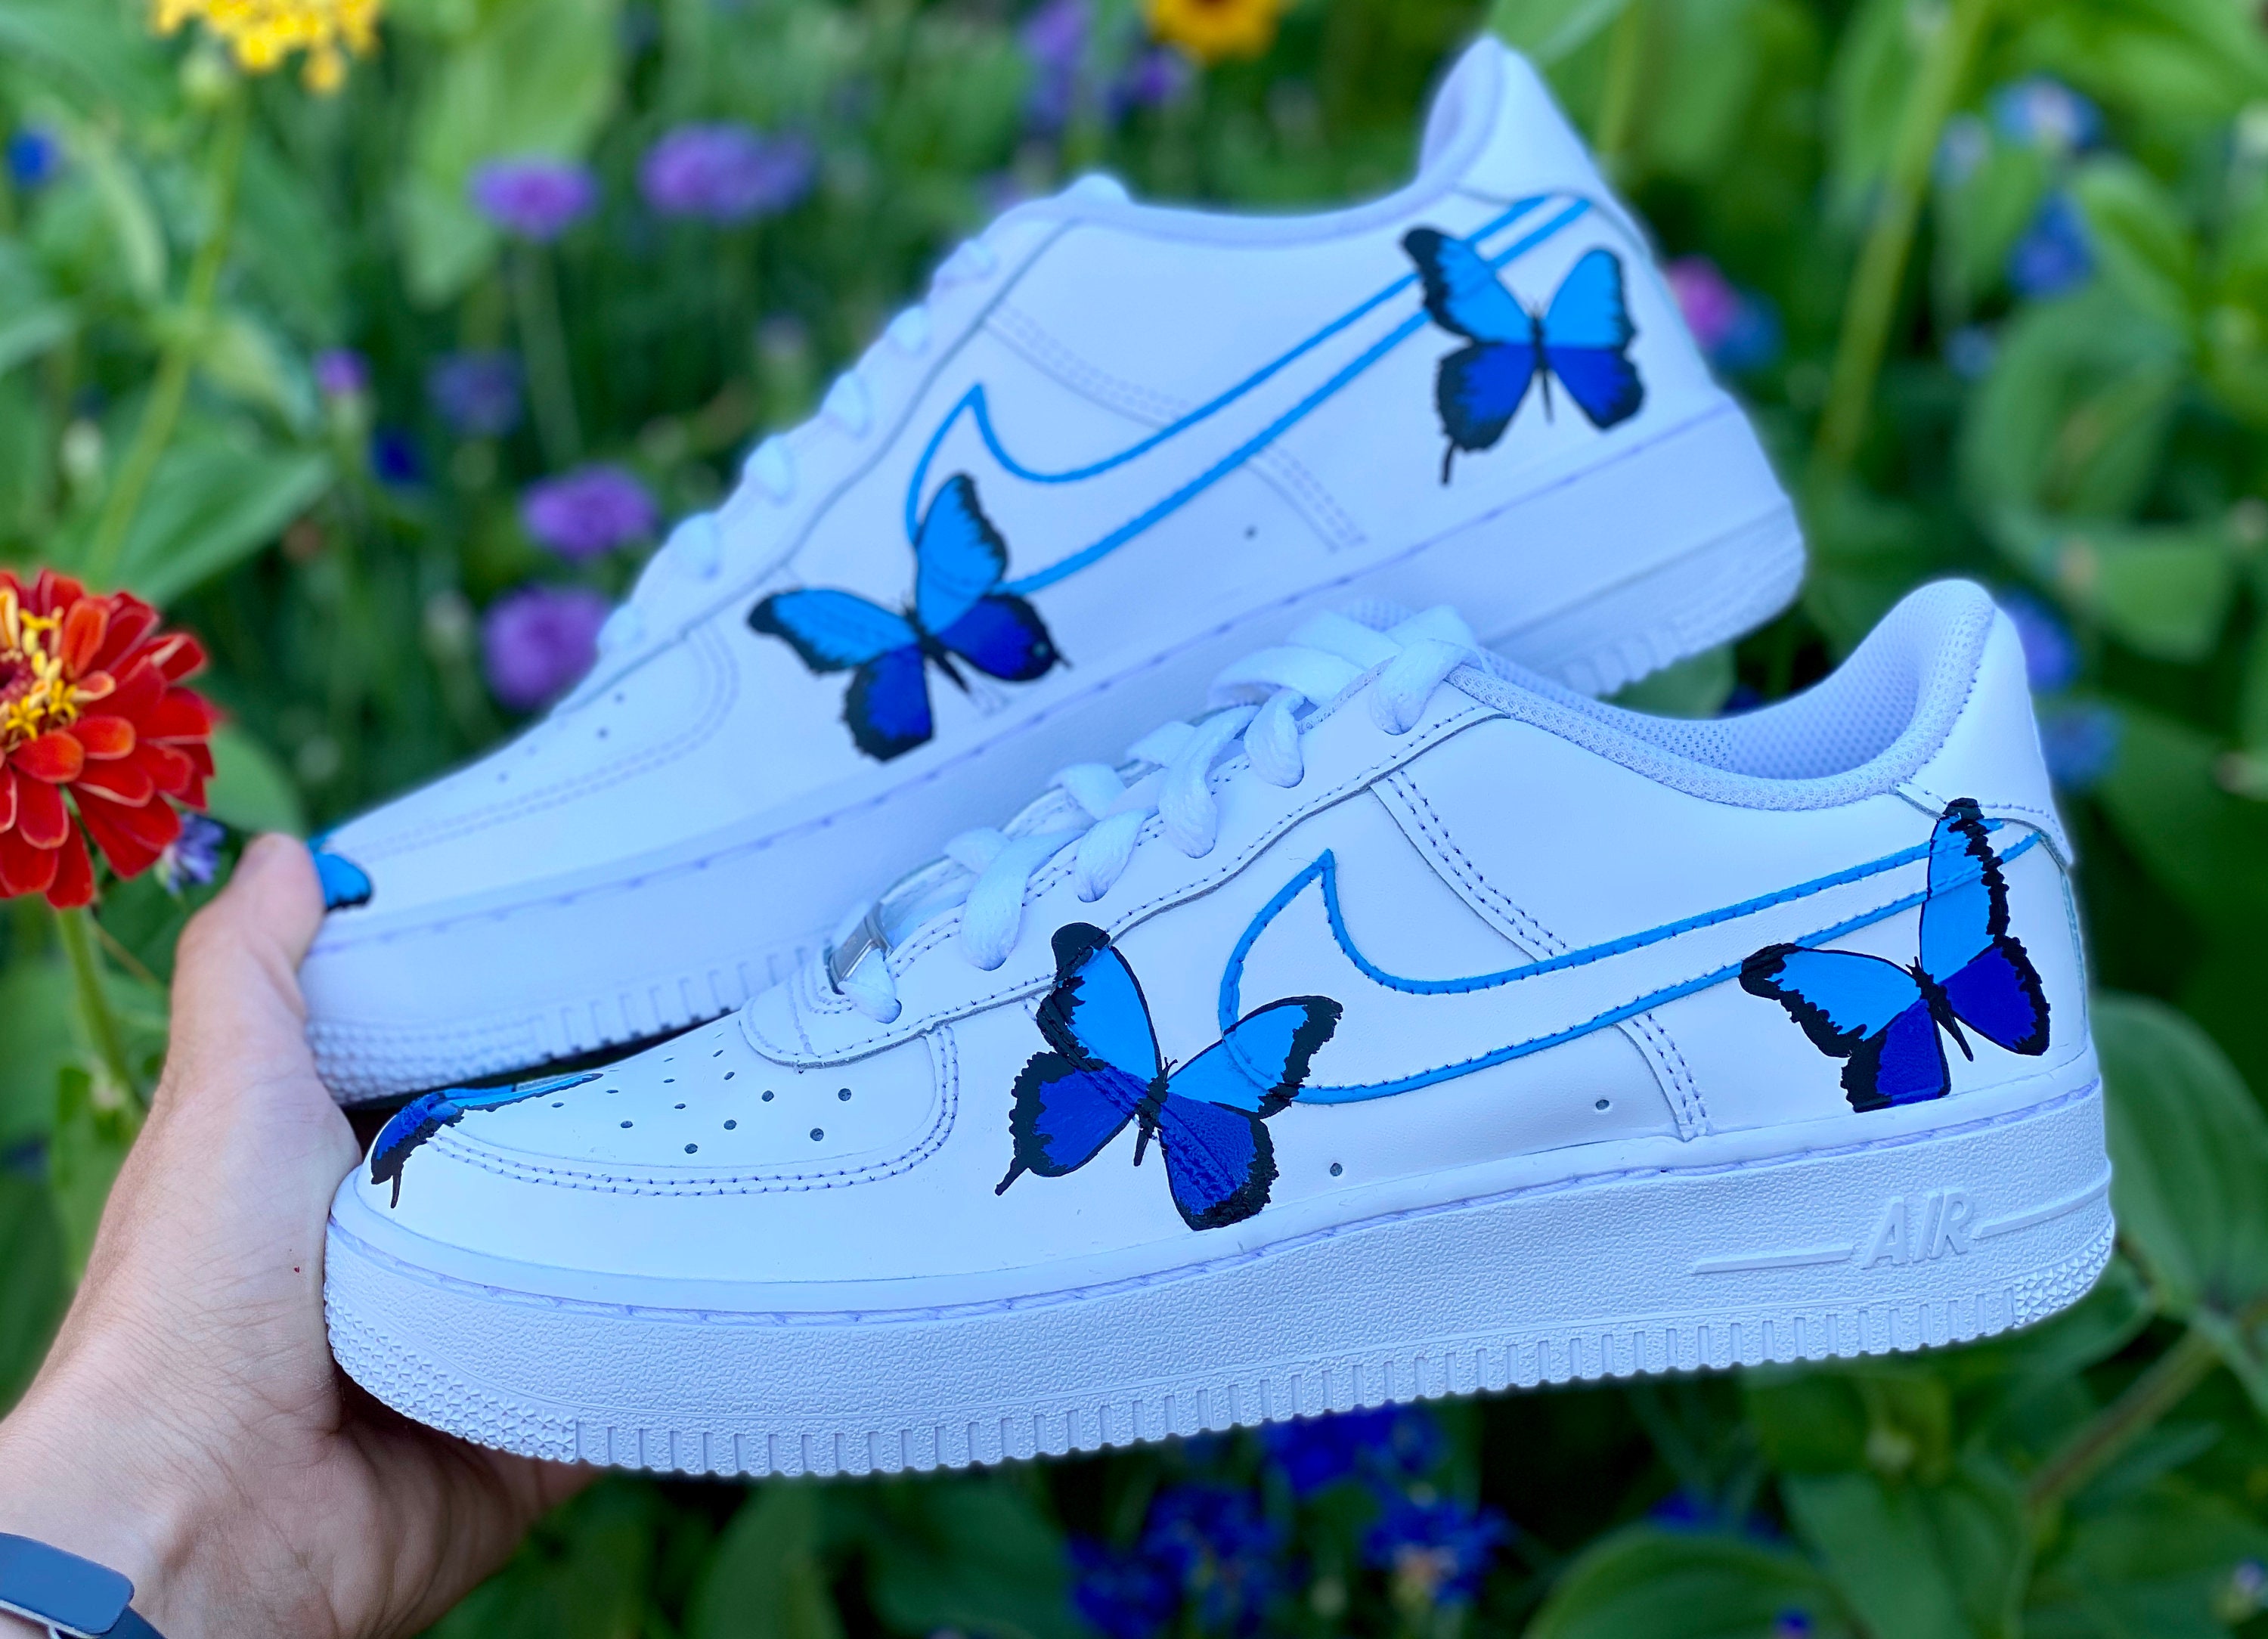 Custom Pick your color Nike Butterfly Air Force Ones | Etsy